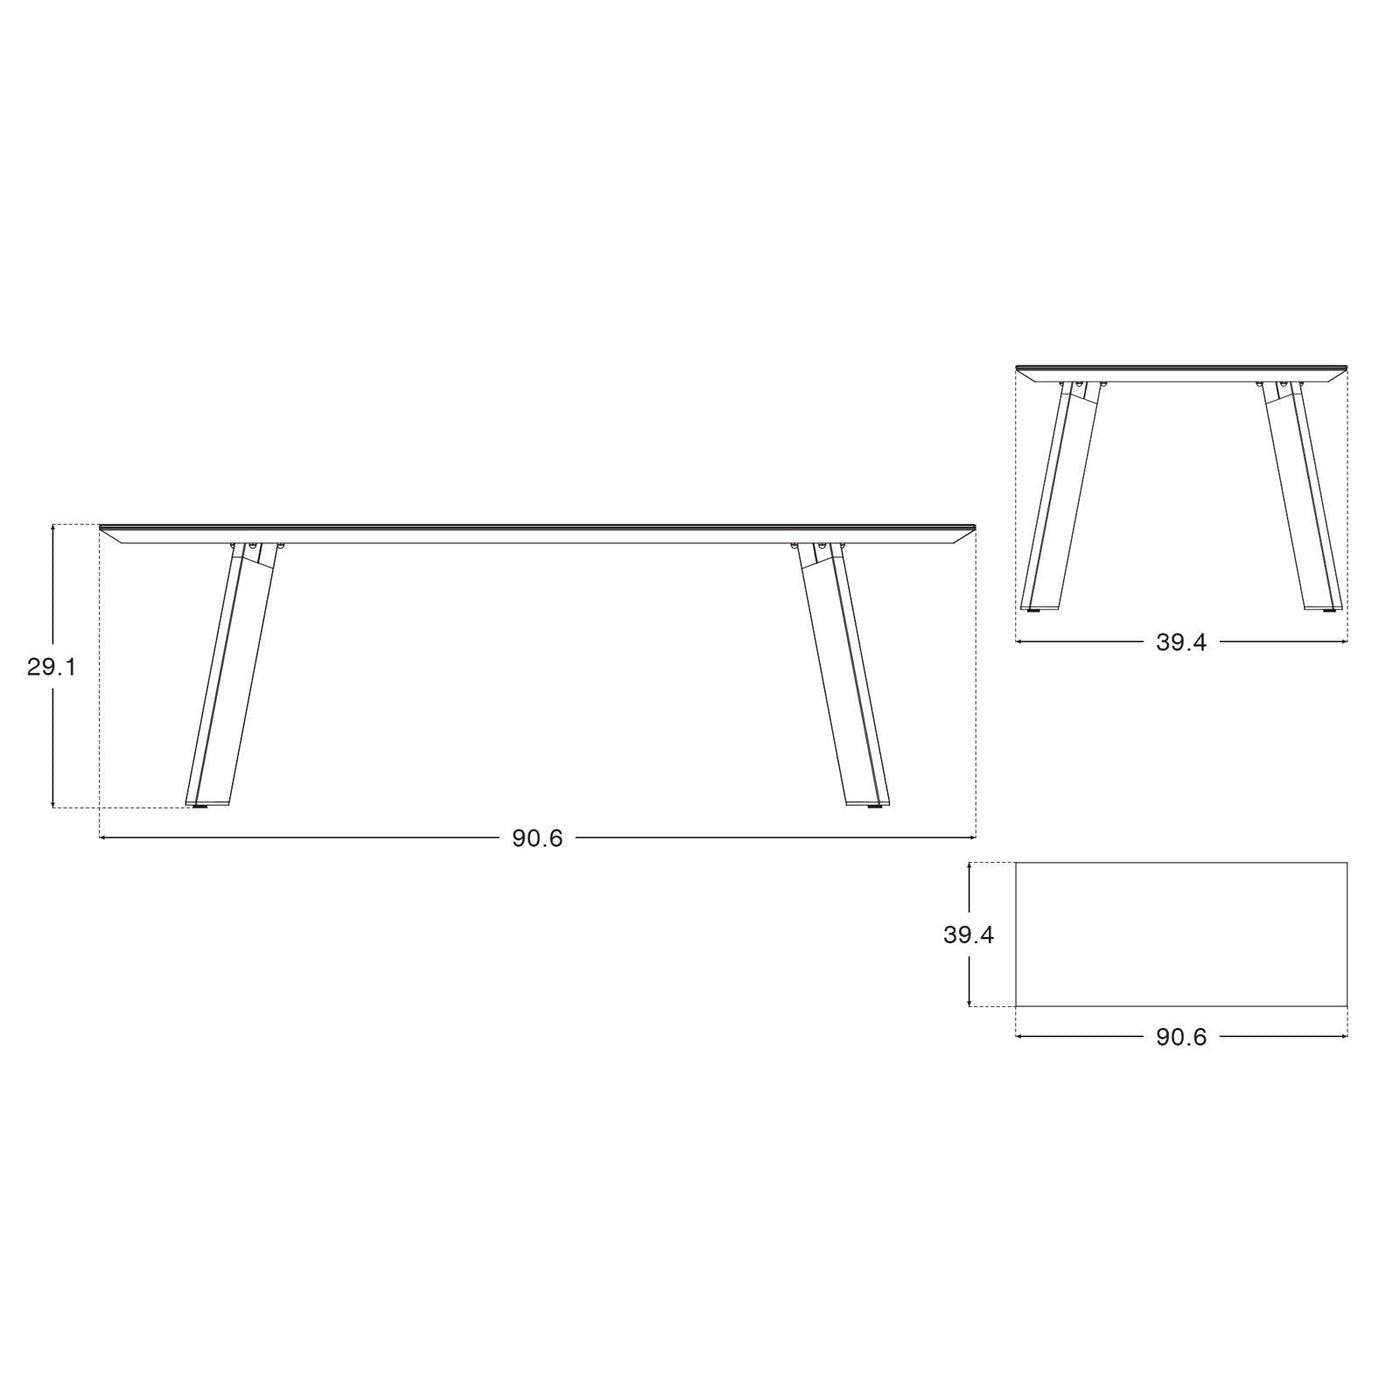 Natural Collection-Anacapa Dining table,Dimension information, Length, height, width data information- Sunsitt Signature